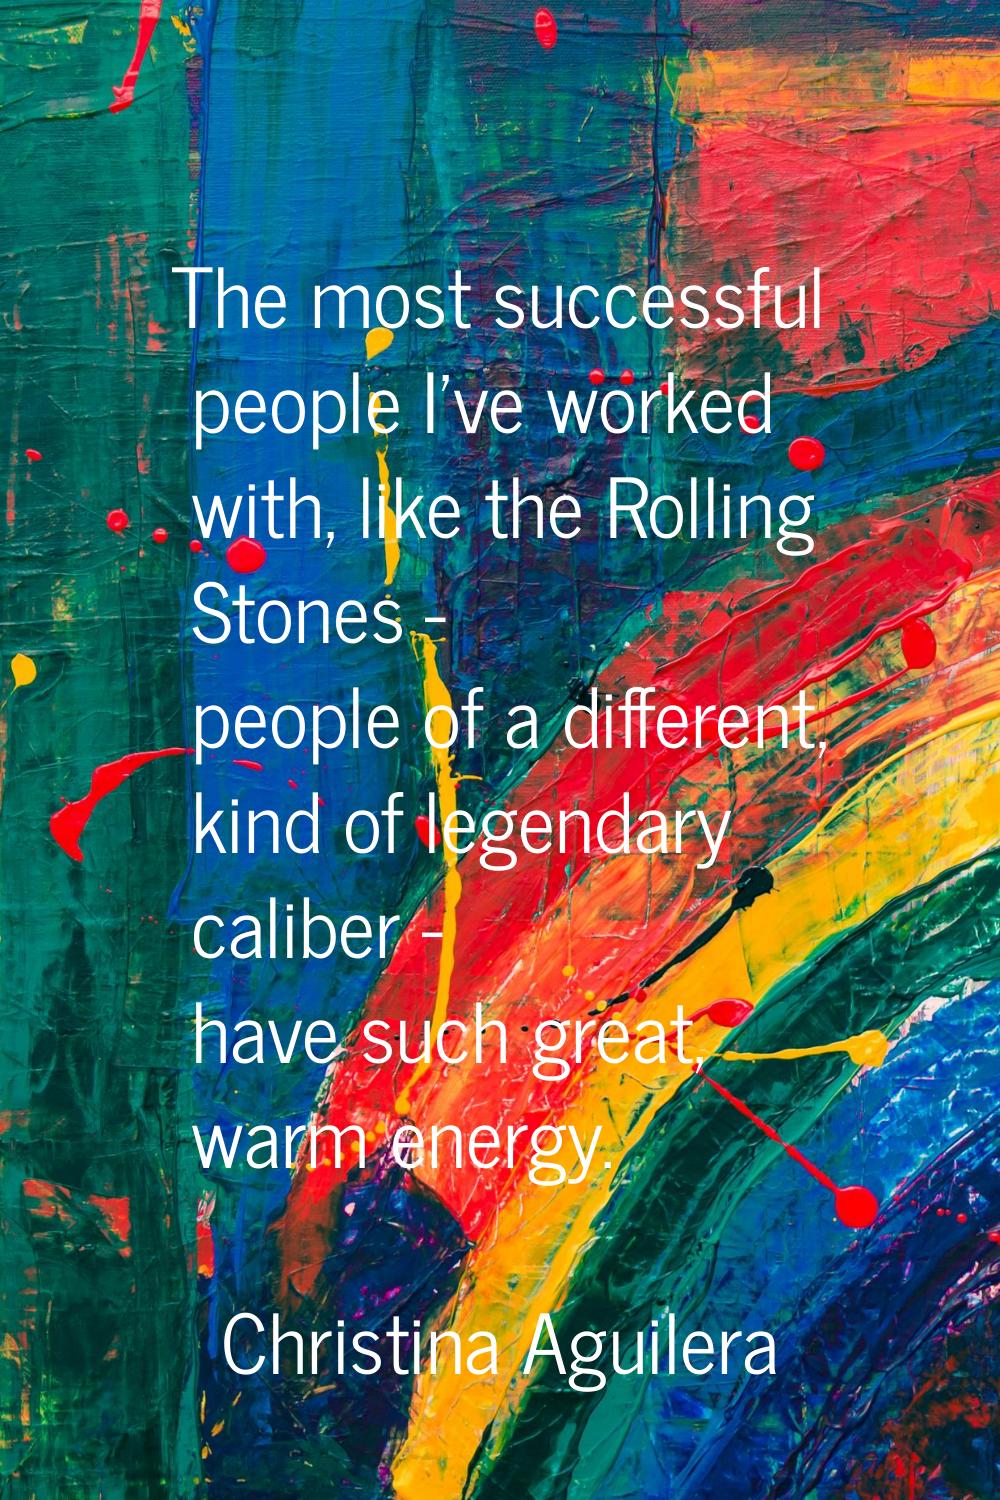 The most successful people I've worked with, like the Rolling Stones - people of a different, kind 